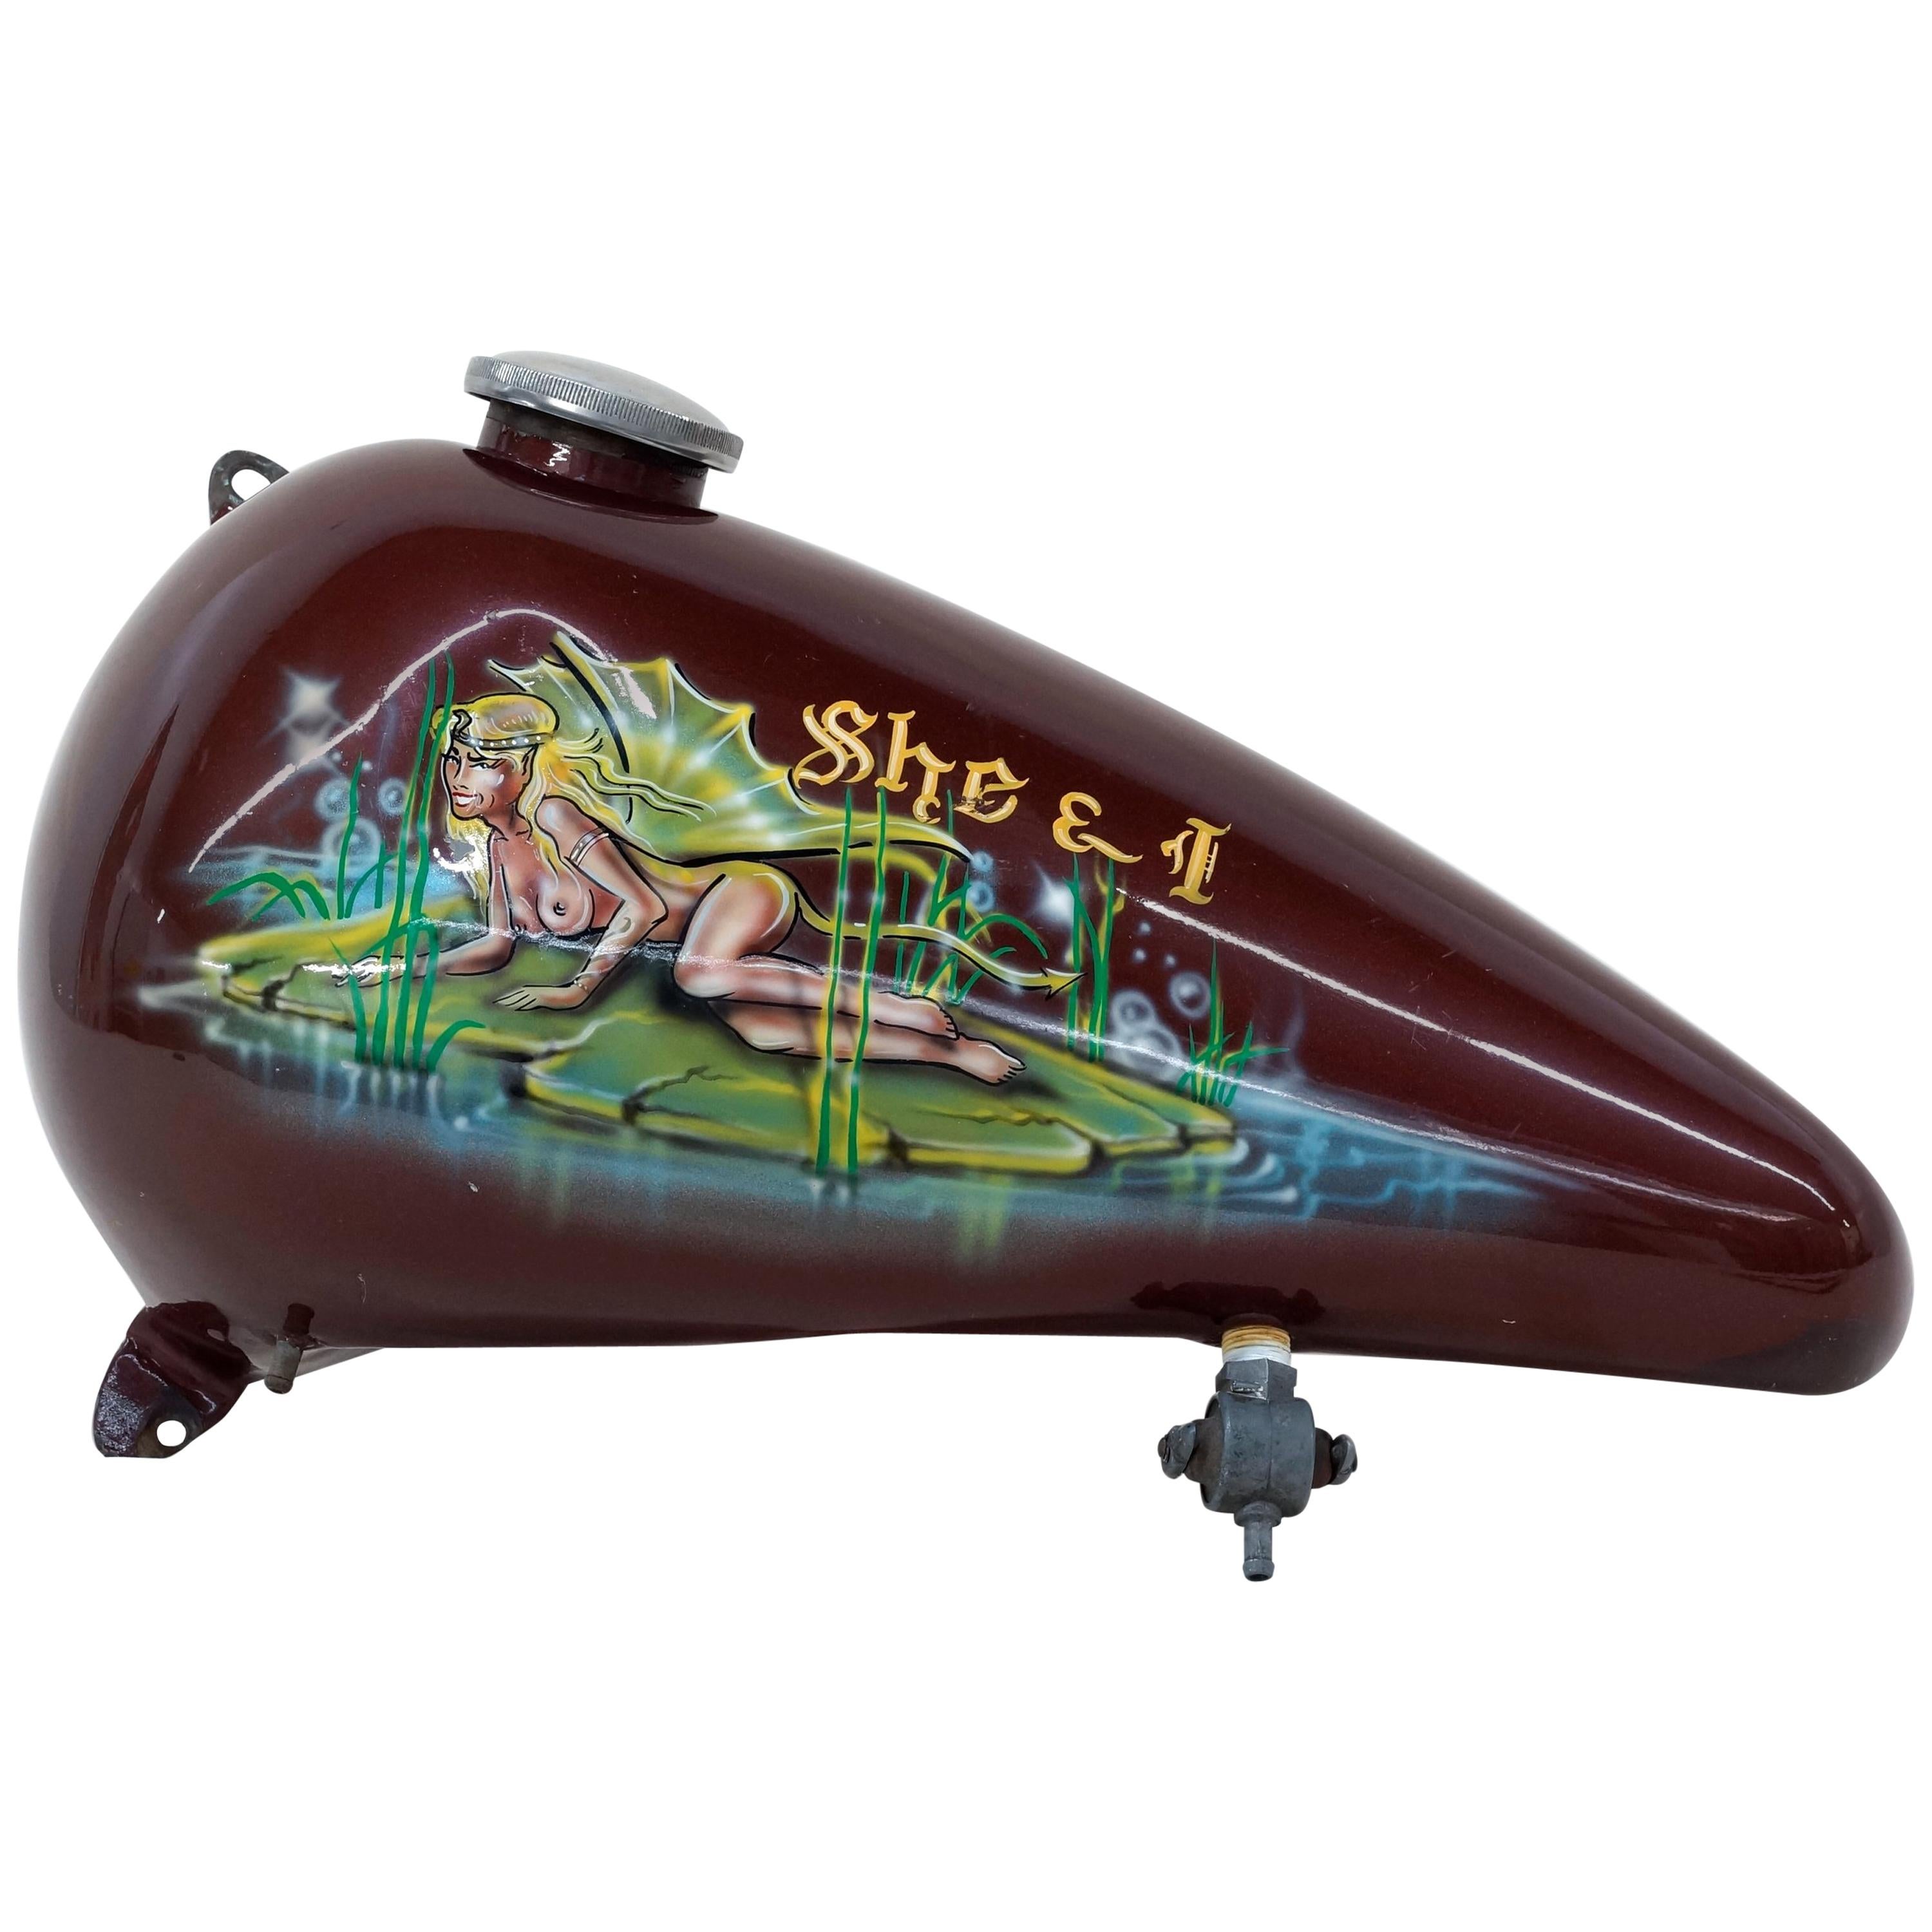 Harley Davidson Chopper Gas Tank, Hand-Painted, "She and I"